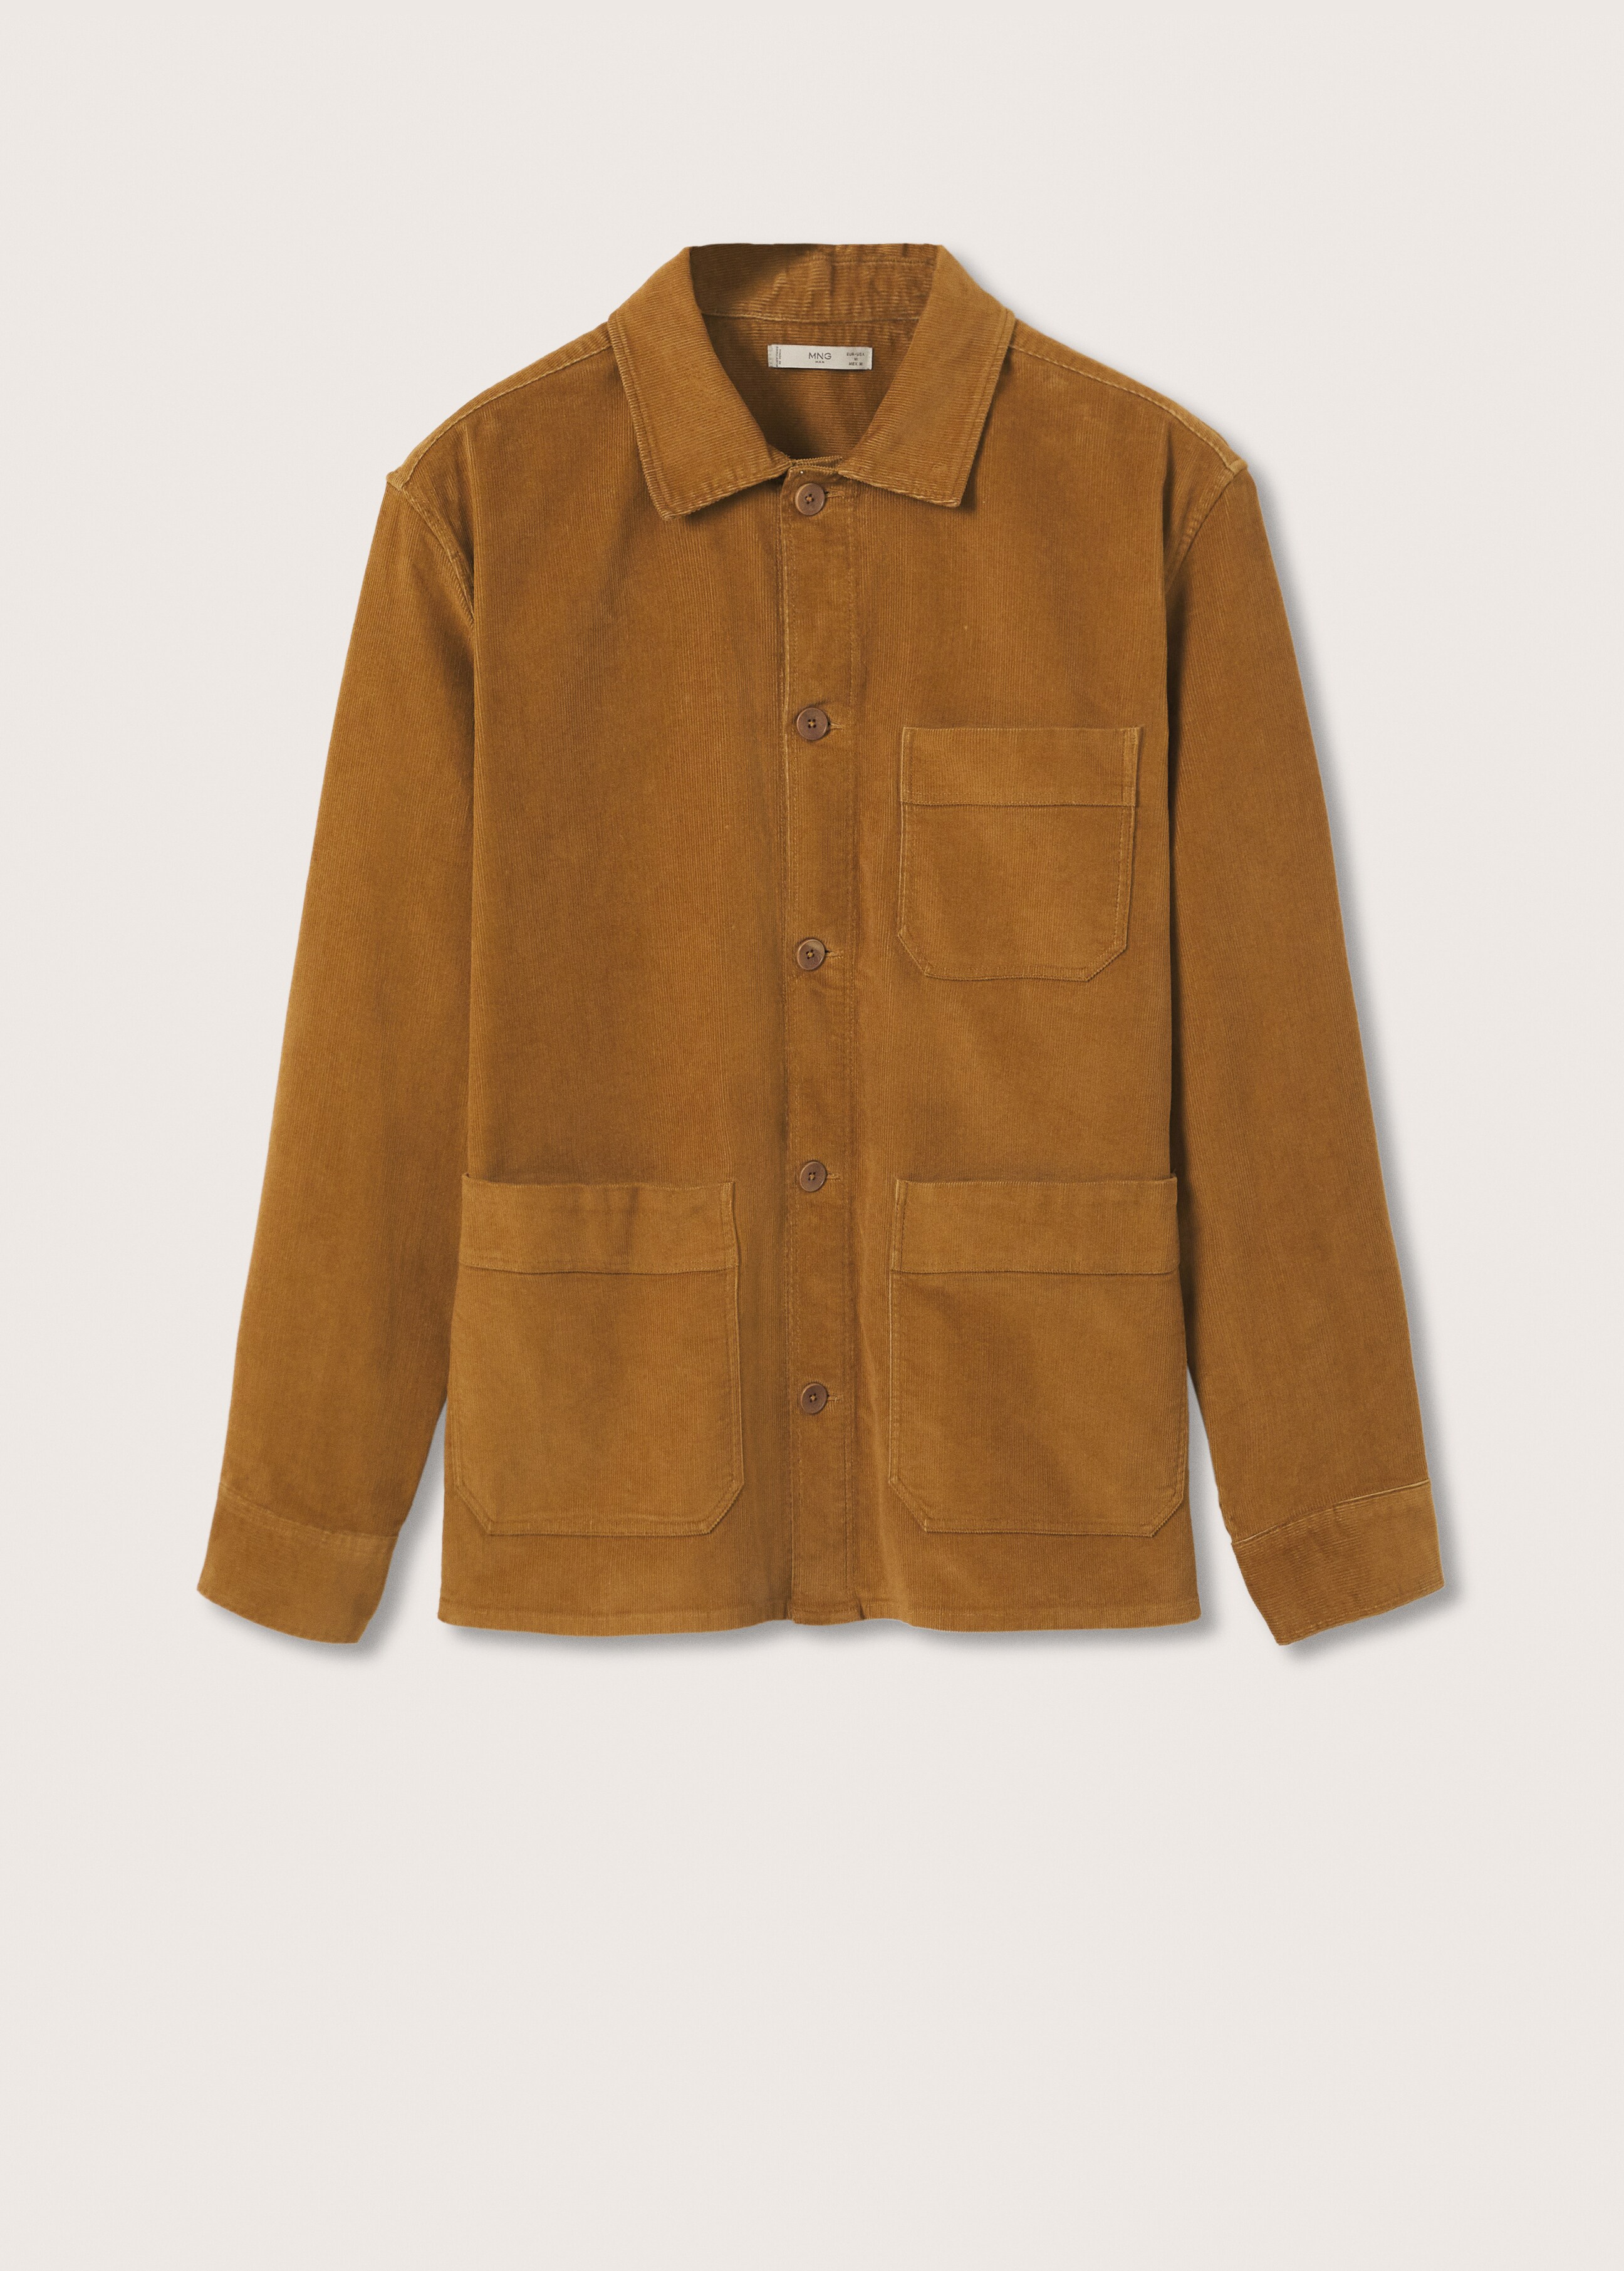 Worker corduroy overshirt - Article without model